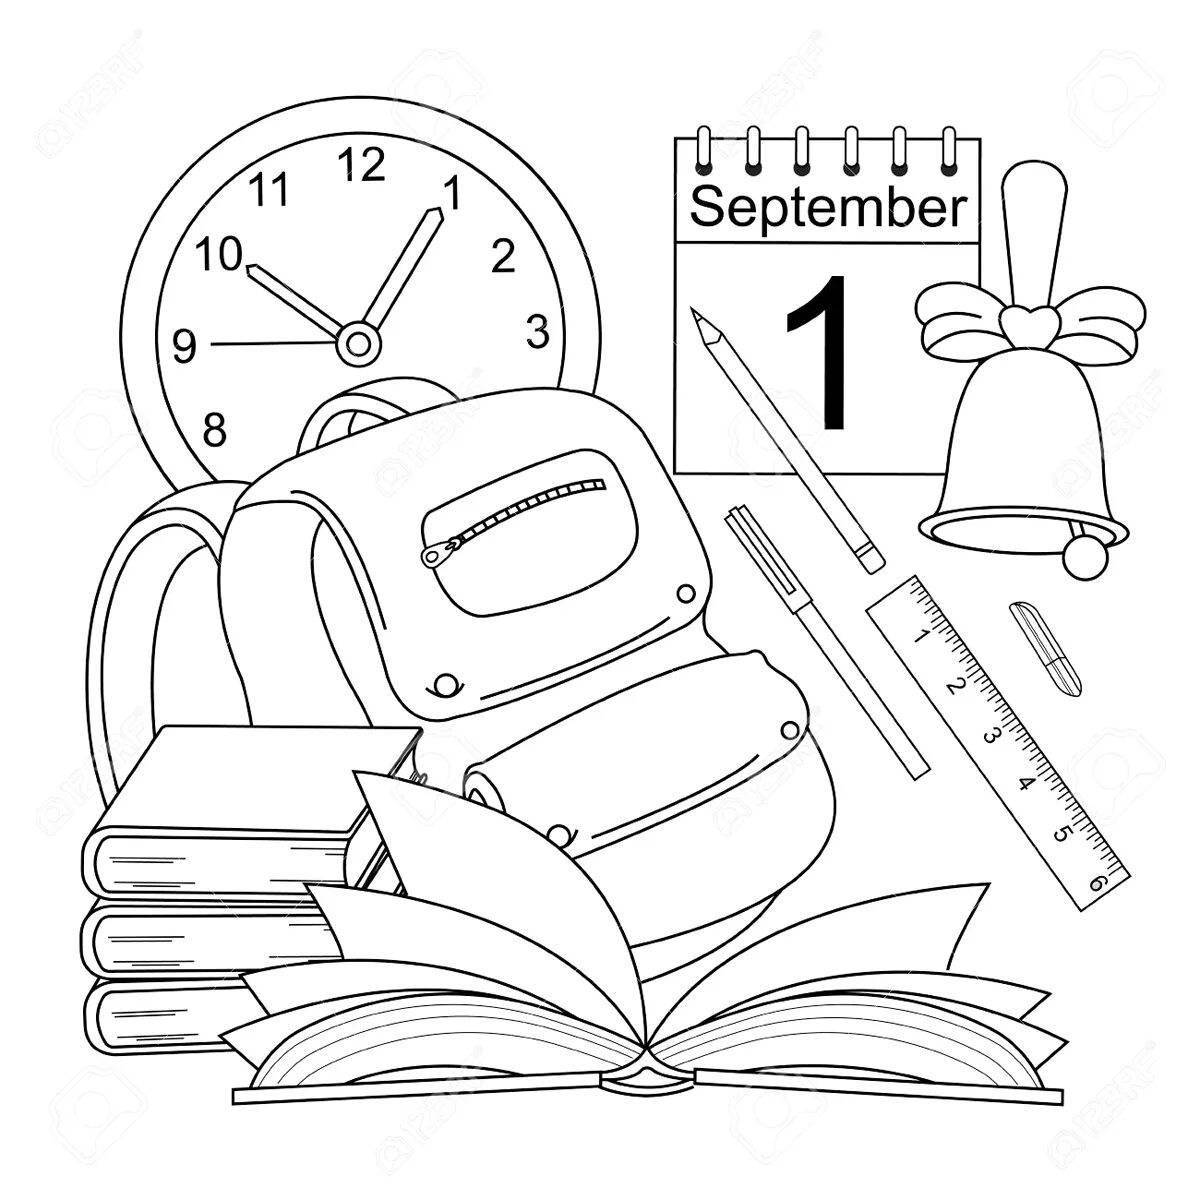 September 1st coloring page playful